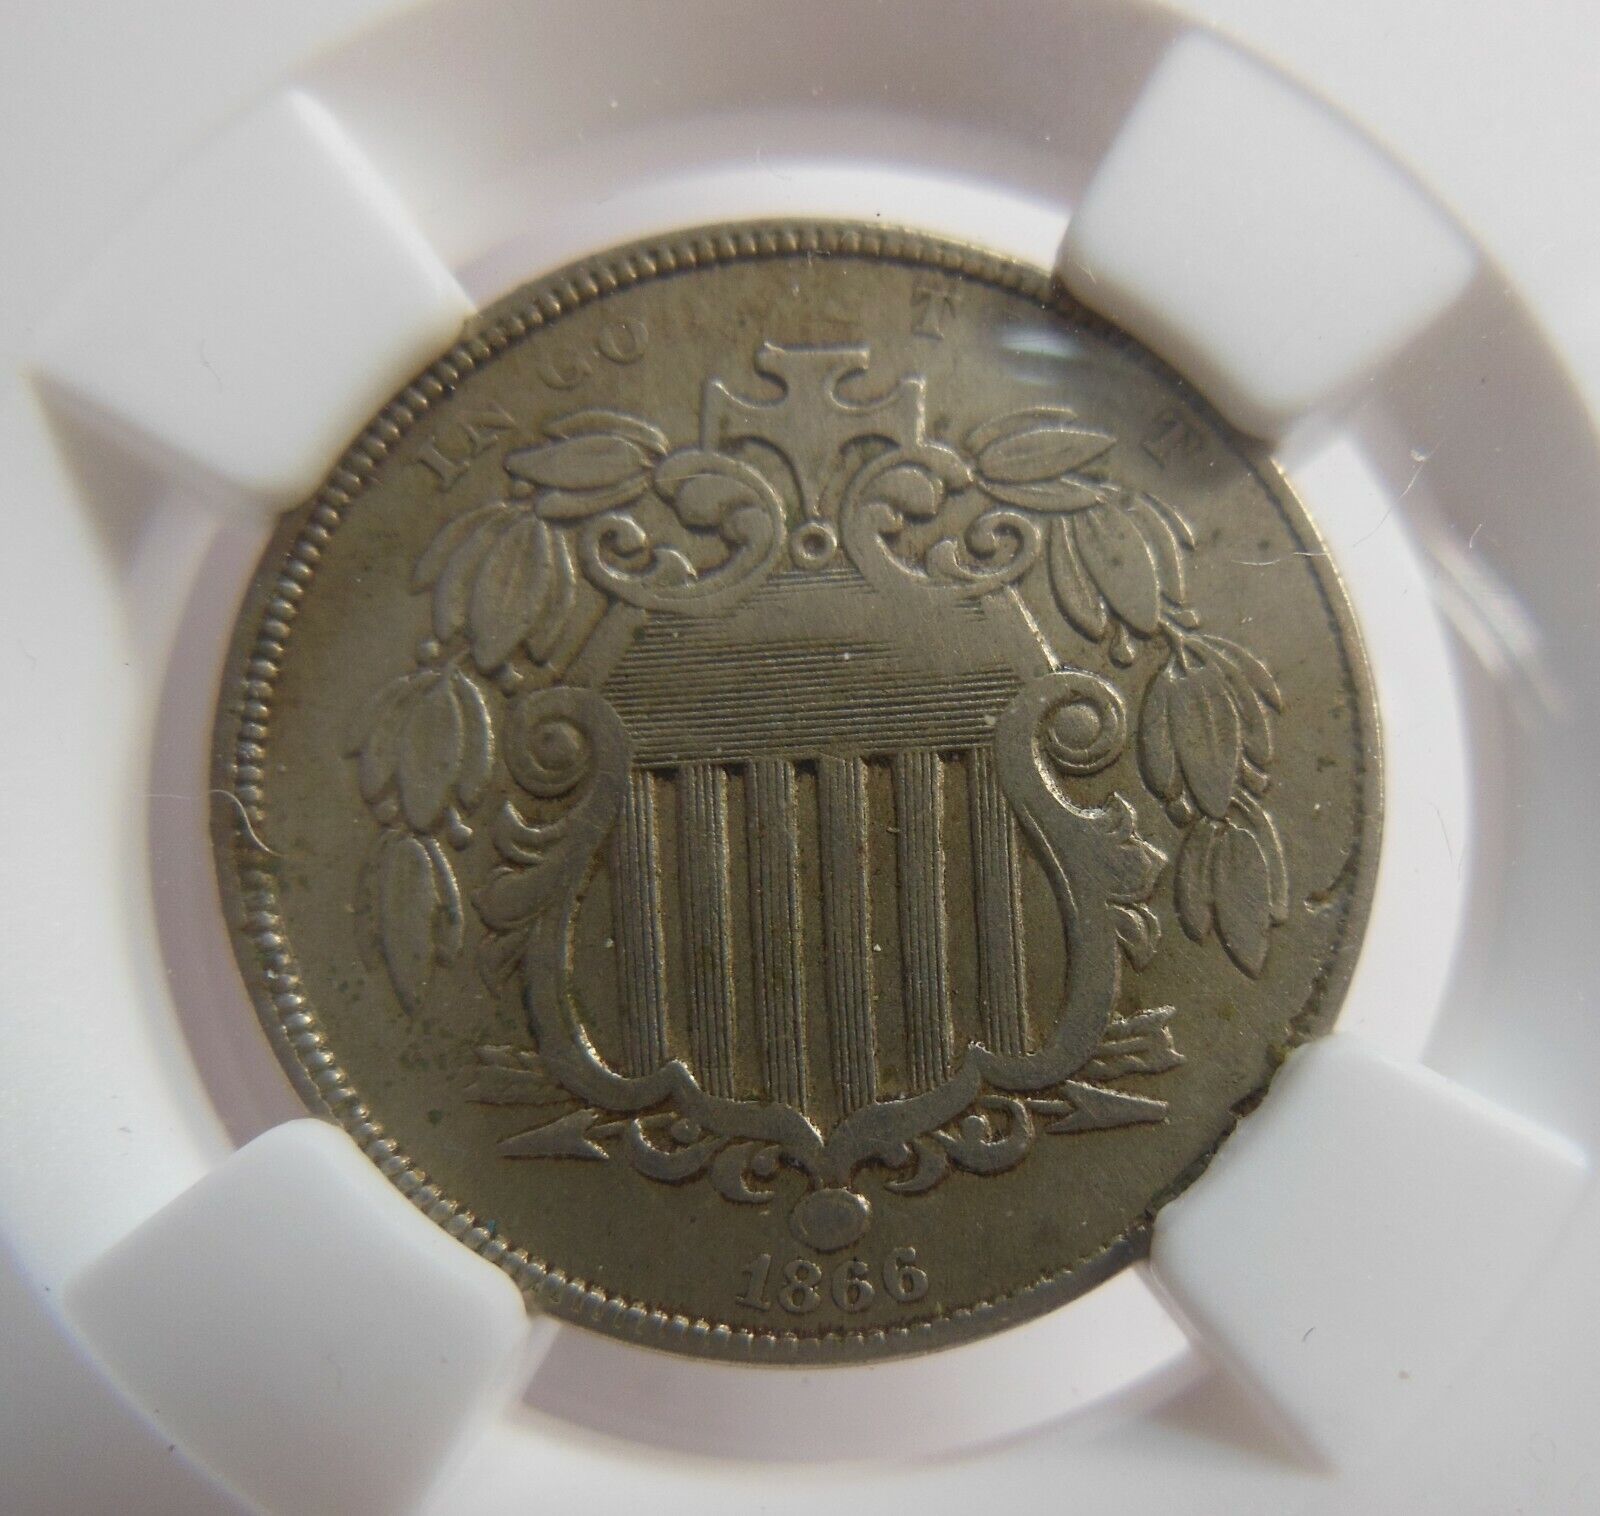 1866 Shield Nickel, Ngc Vf Cleaned, Minor Cleaning, Rotated Reverse Aprox. 30%